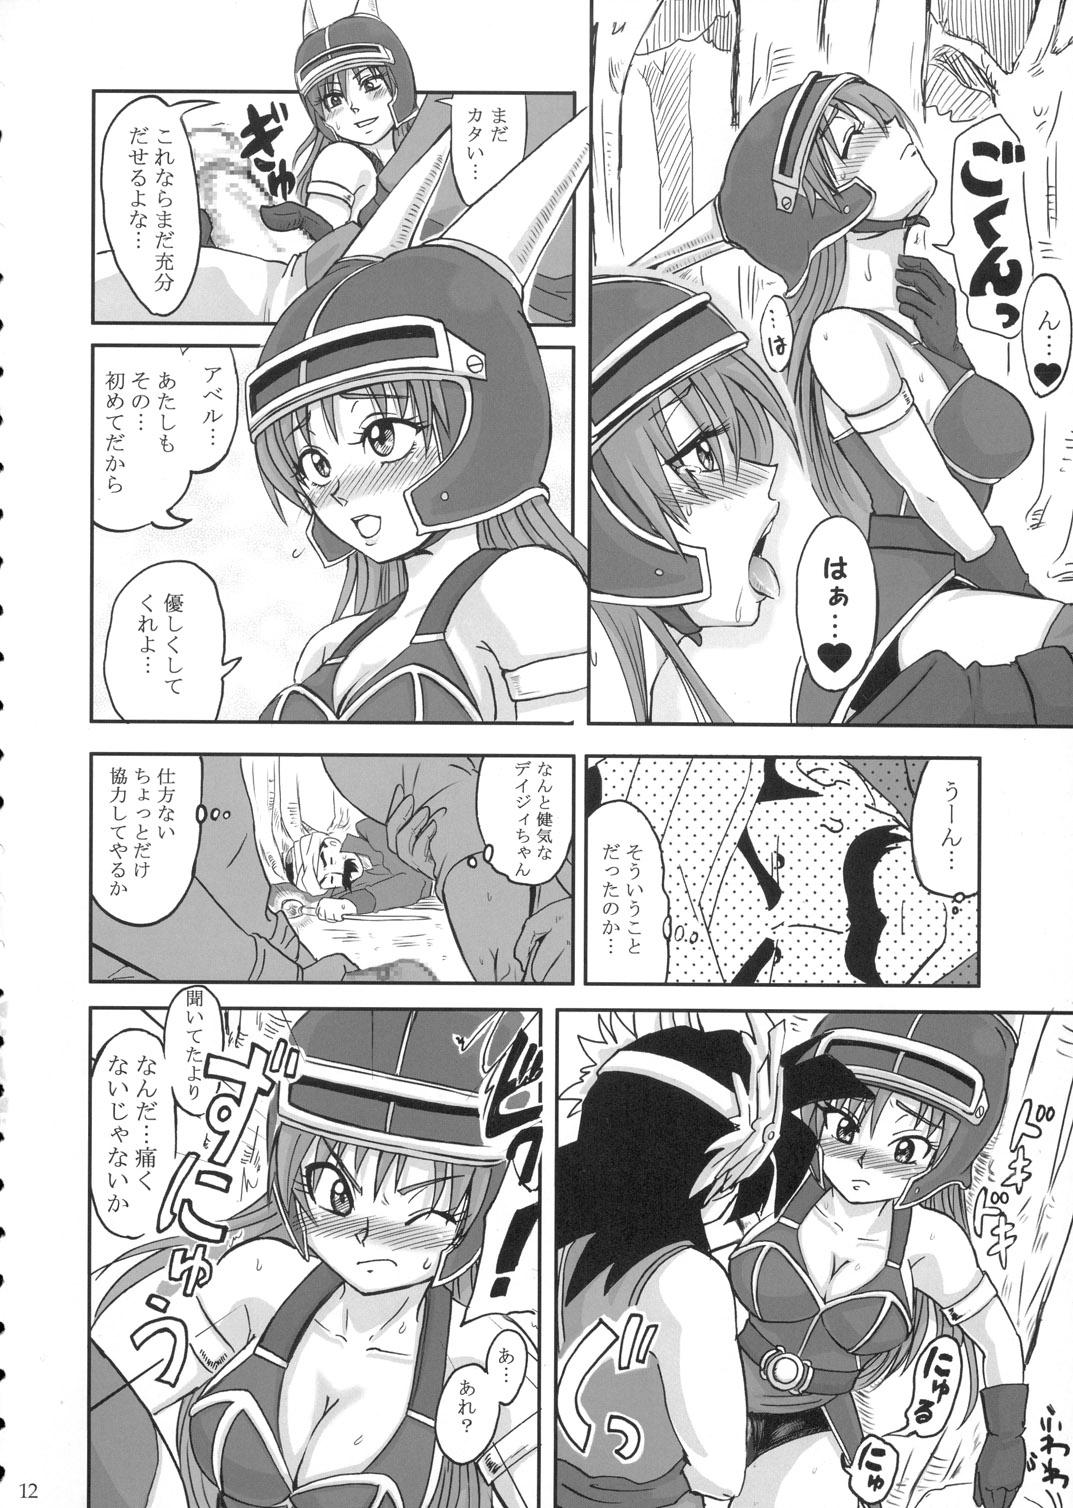 Mouth LoveLove Blue Daisy - Dragon quest yuusha abel densetsu Married - Page 11